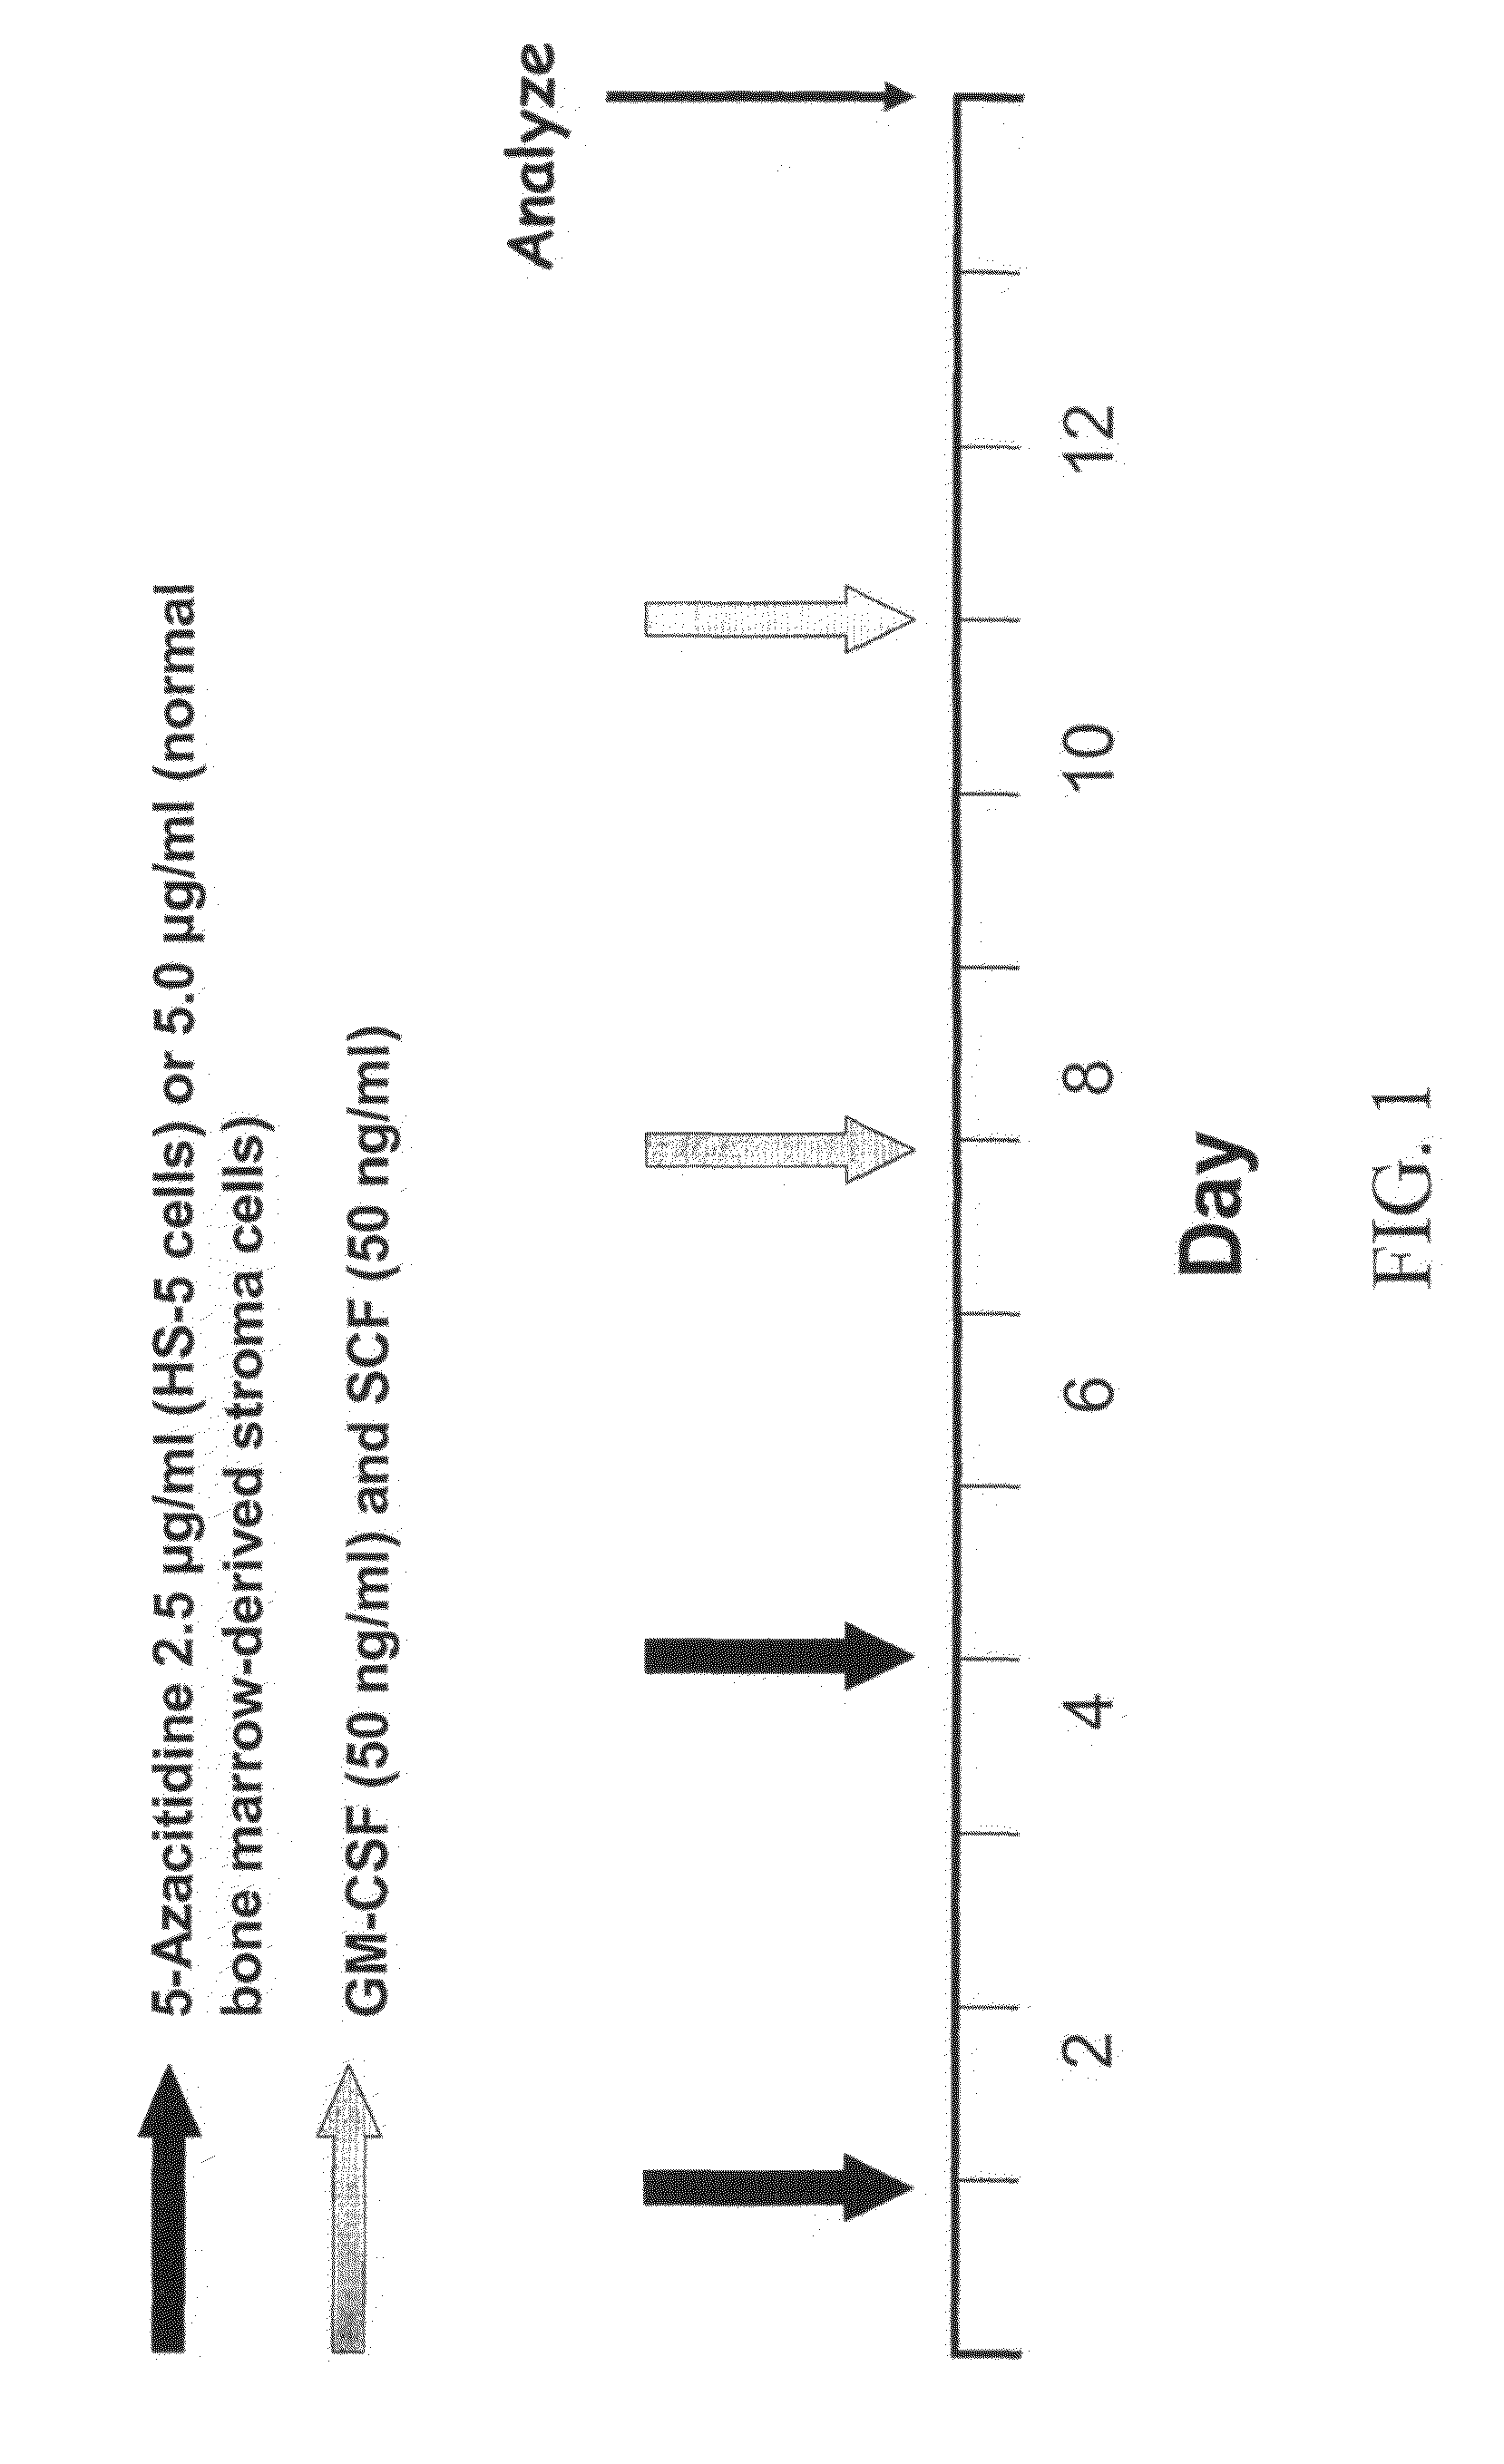 Methods for transdifferentiating cells